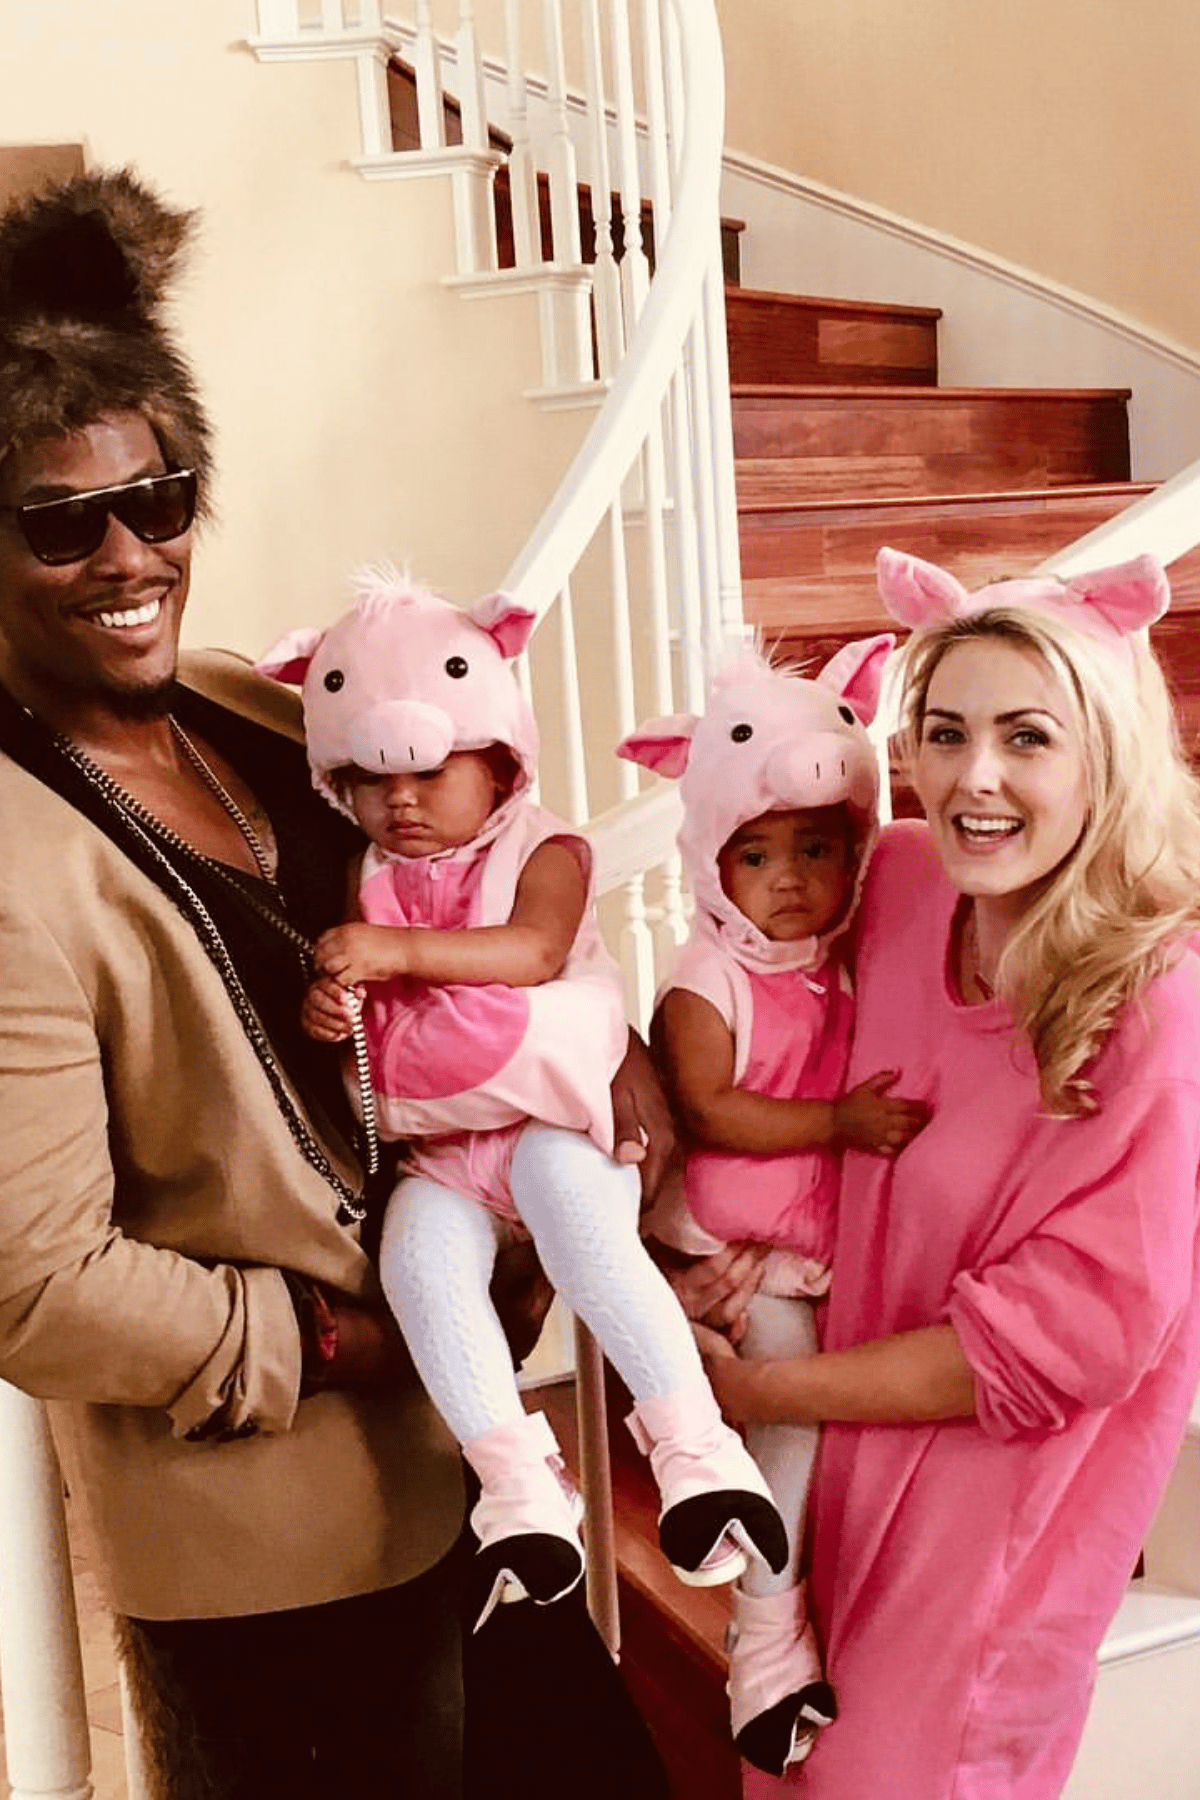 Dad as the lion, mom and twin babies as the three pigs